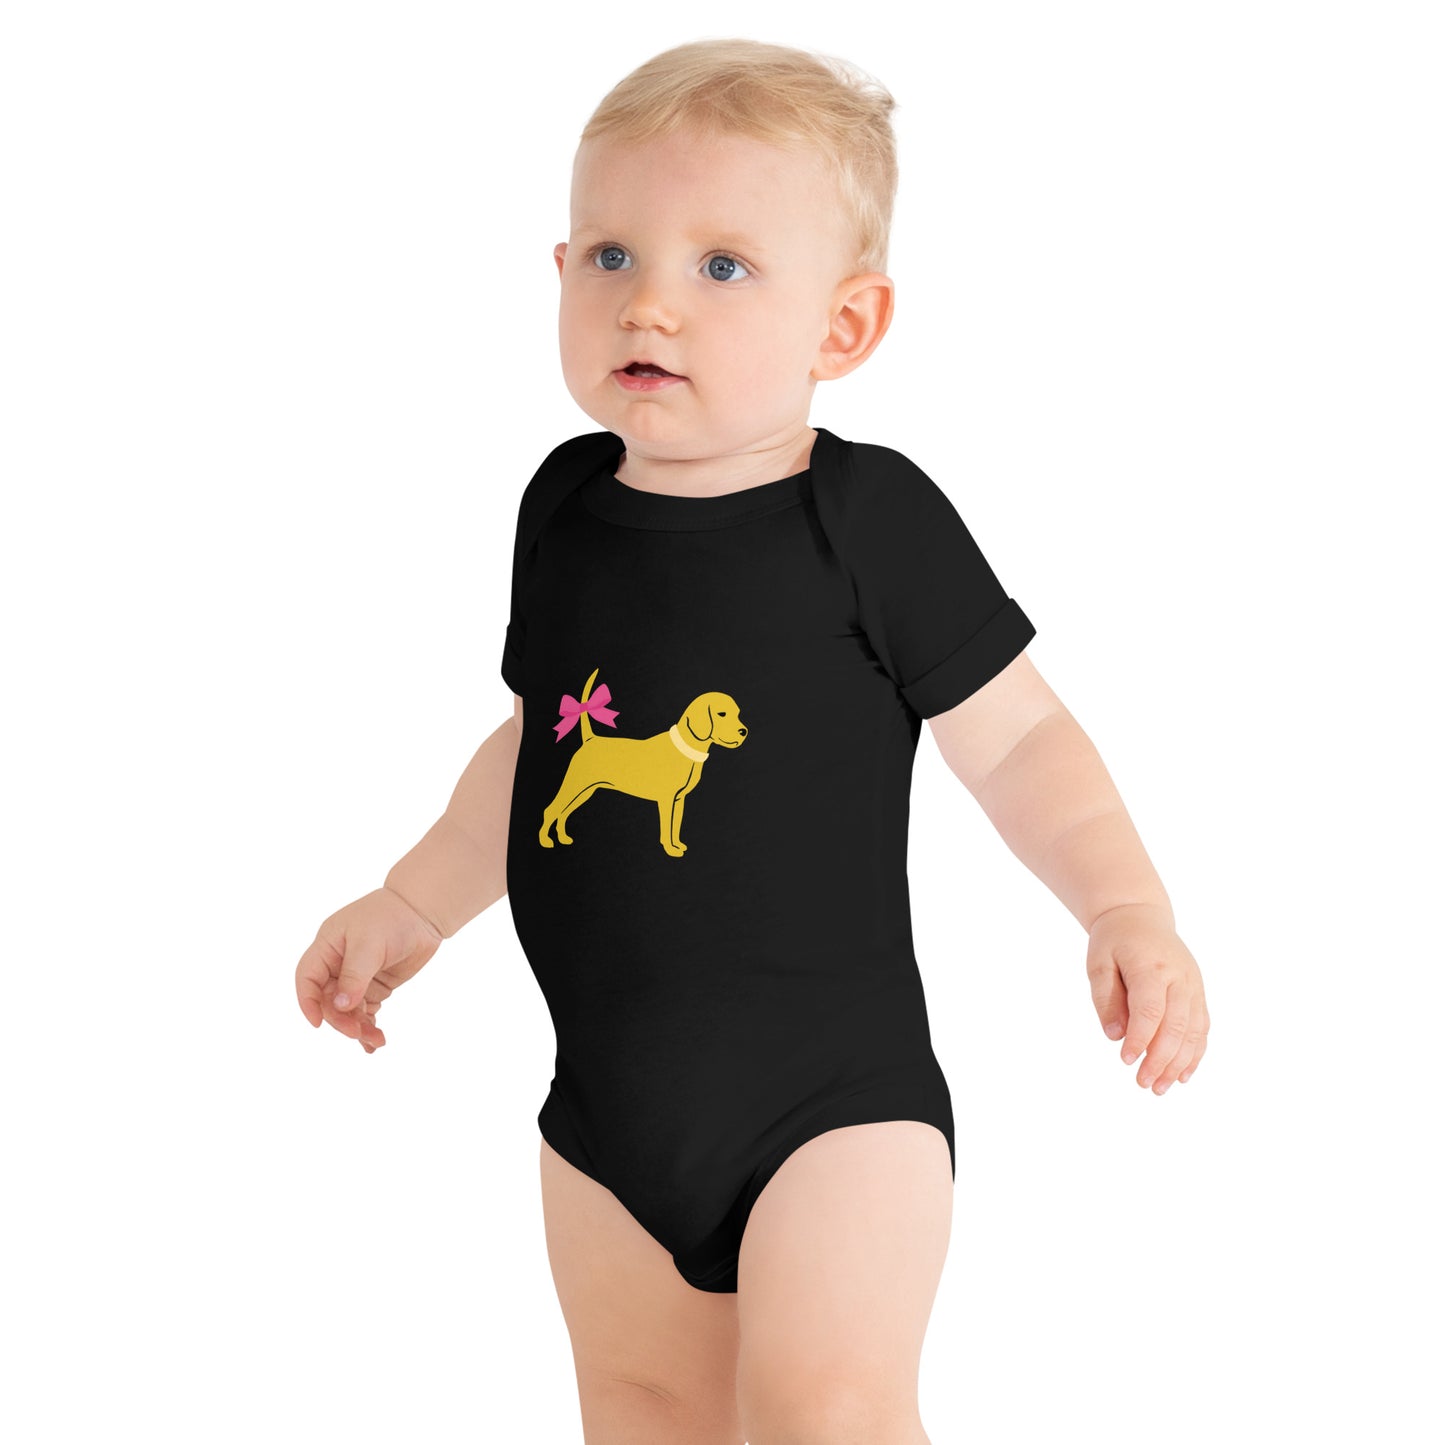 Unleashed Life Little Yellow Dog with Bow Baby Short Sleeve Onesie